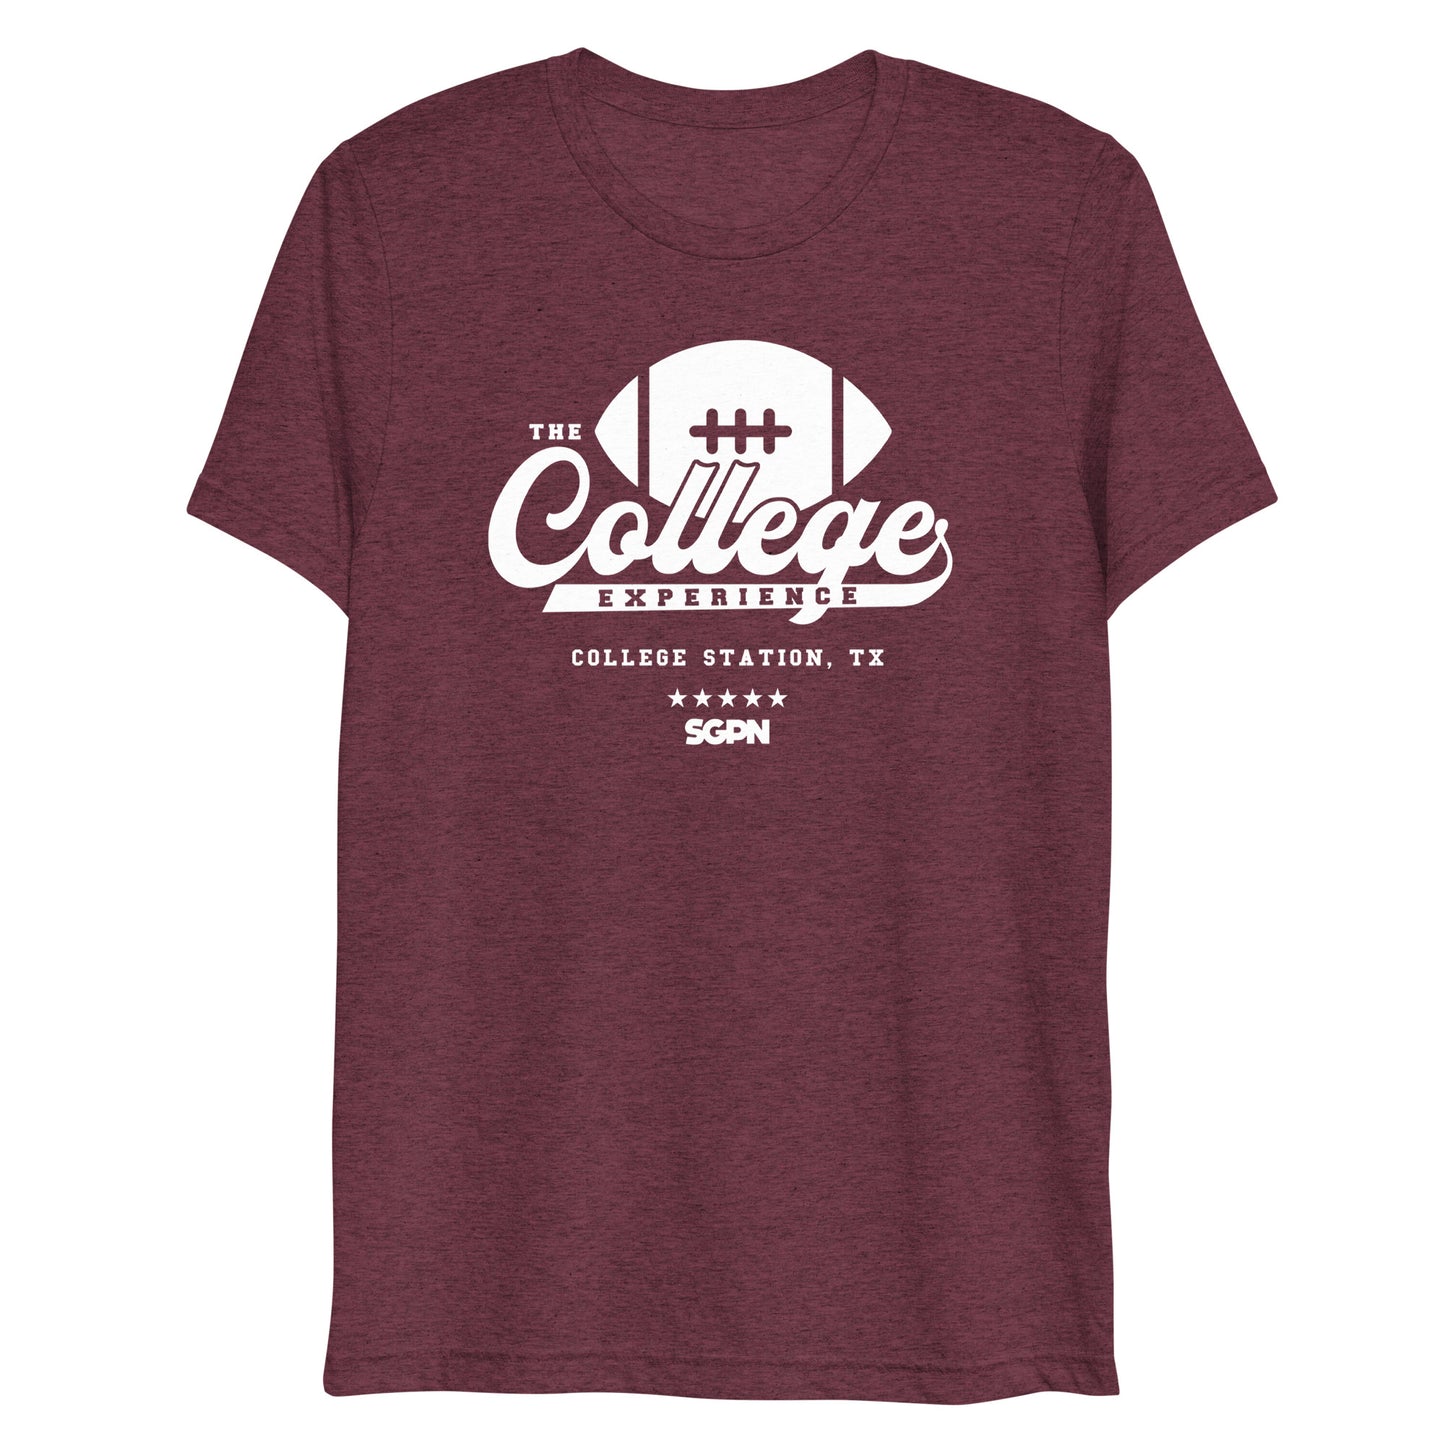 The College Football Experience - College Station edition - Maroon Short sleeve t-shirt